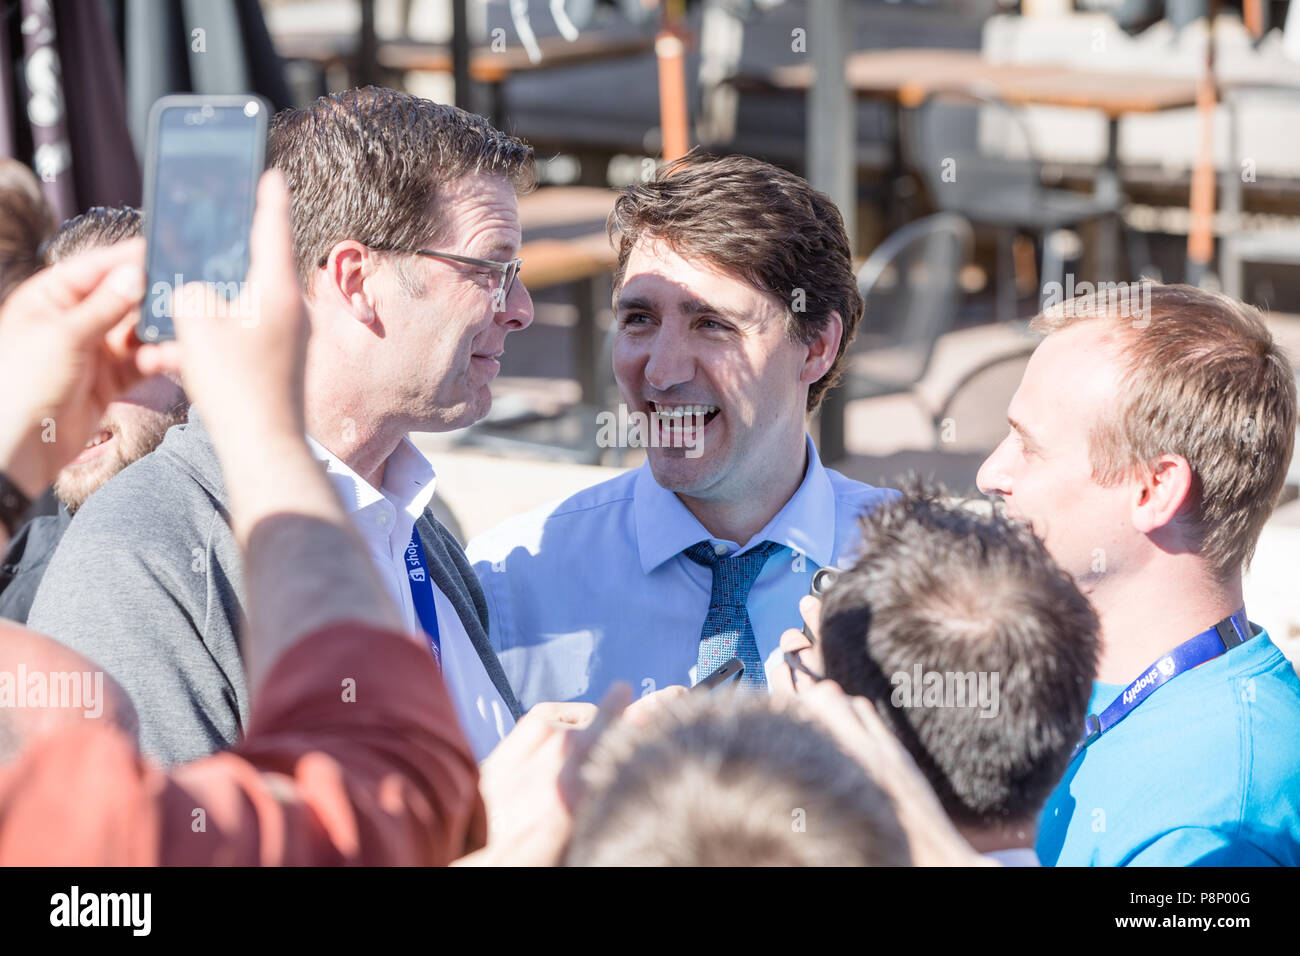 MAY 24, 2018 - TORONTO, CANADA - CANADIAN PRIME MINISTER JUSTIN TRUDEAU MEETS FANS AFTER A PUBLIC EVENT. Stock Photo